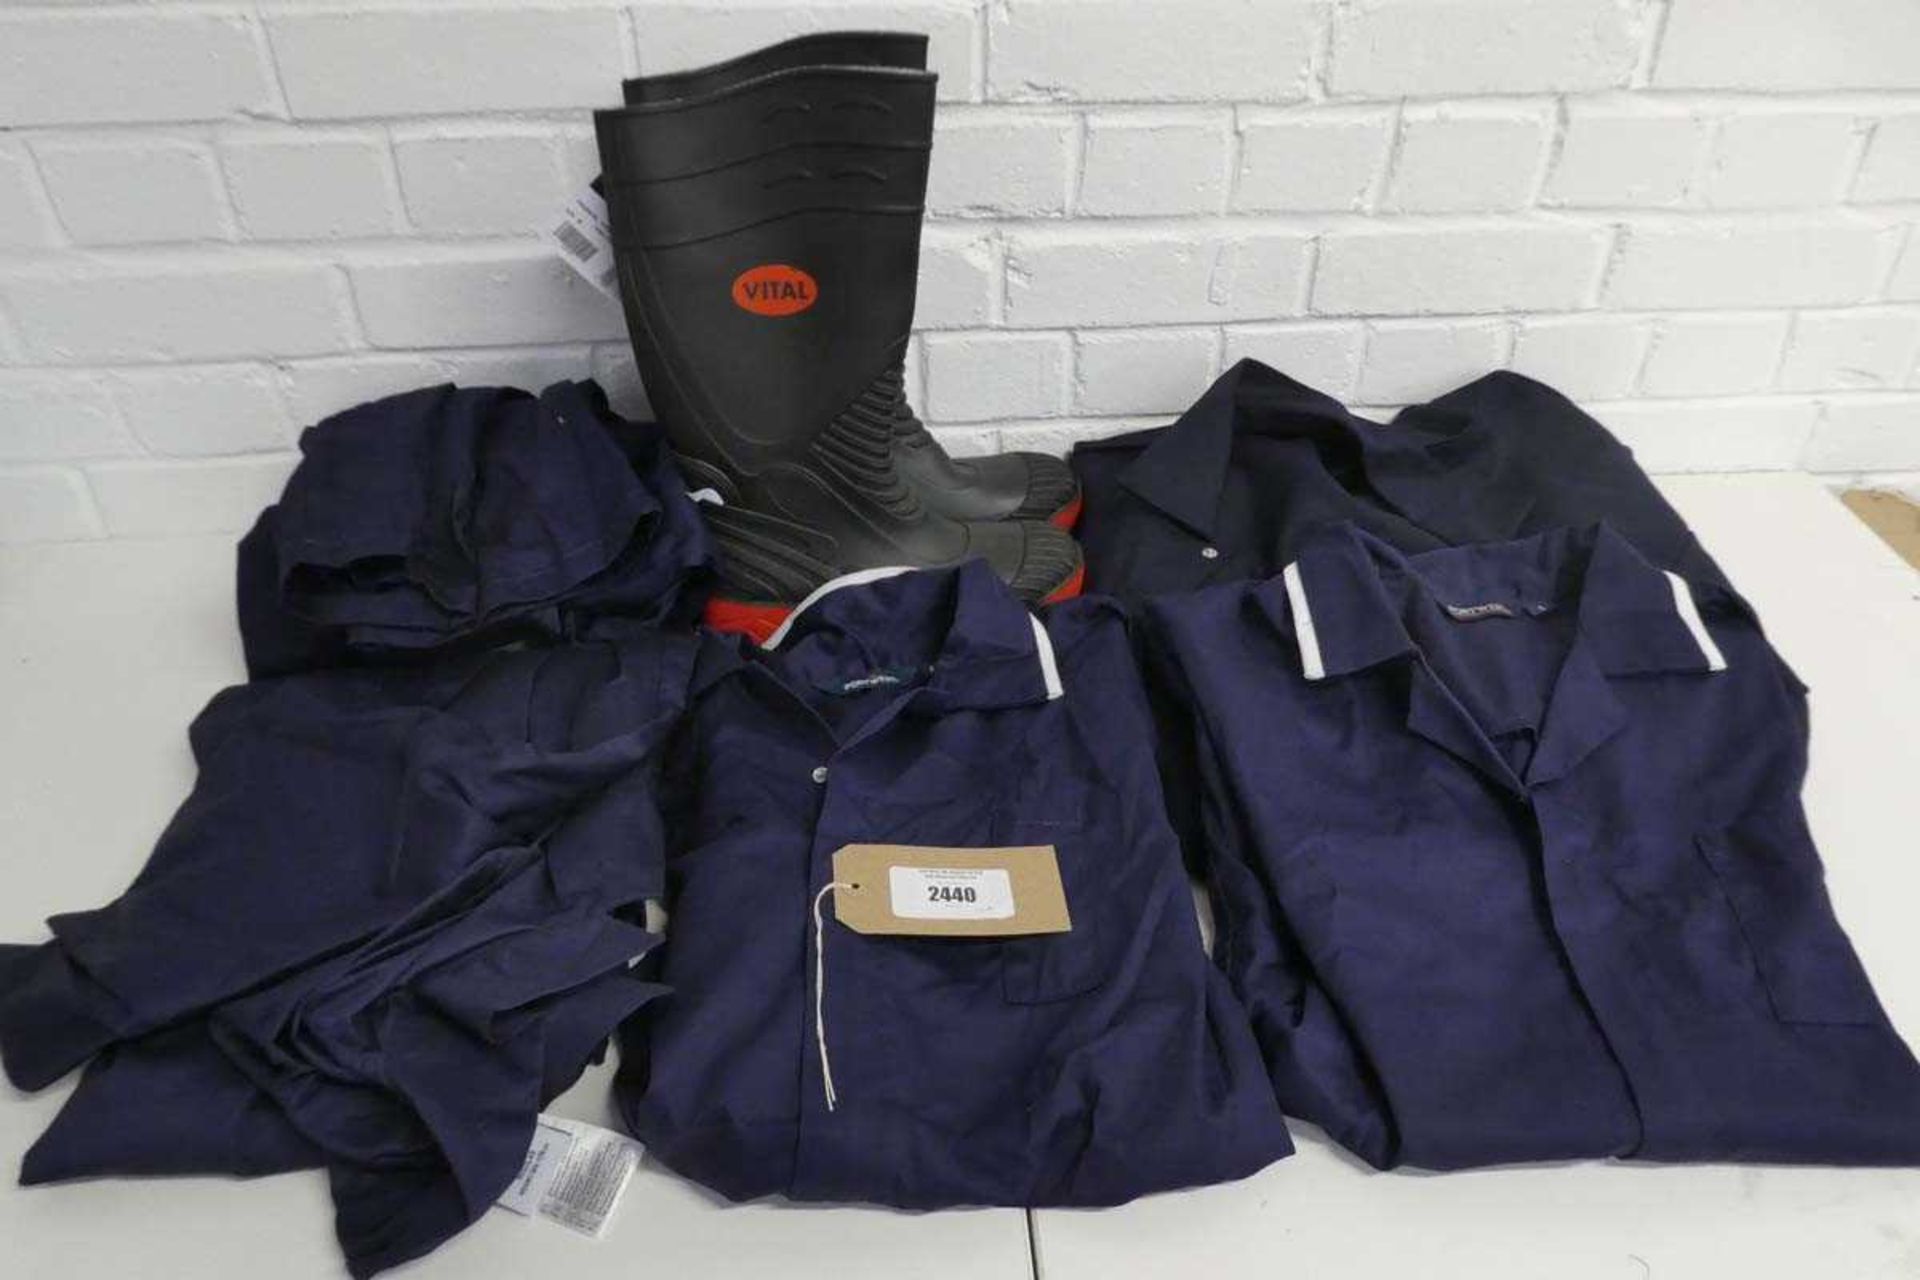 +VAT Pair of Vital steel toe Wellington boots (size 6) with pair of blue work overalls (size 38),